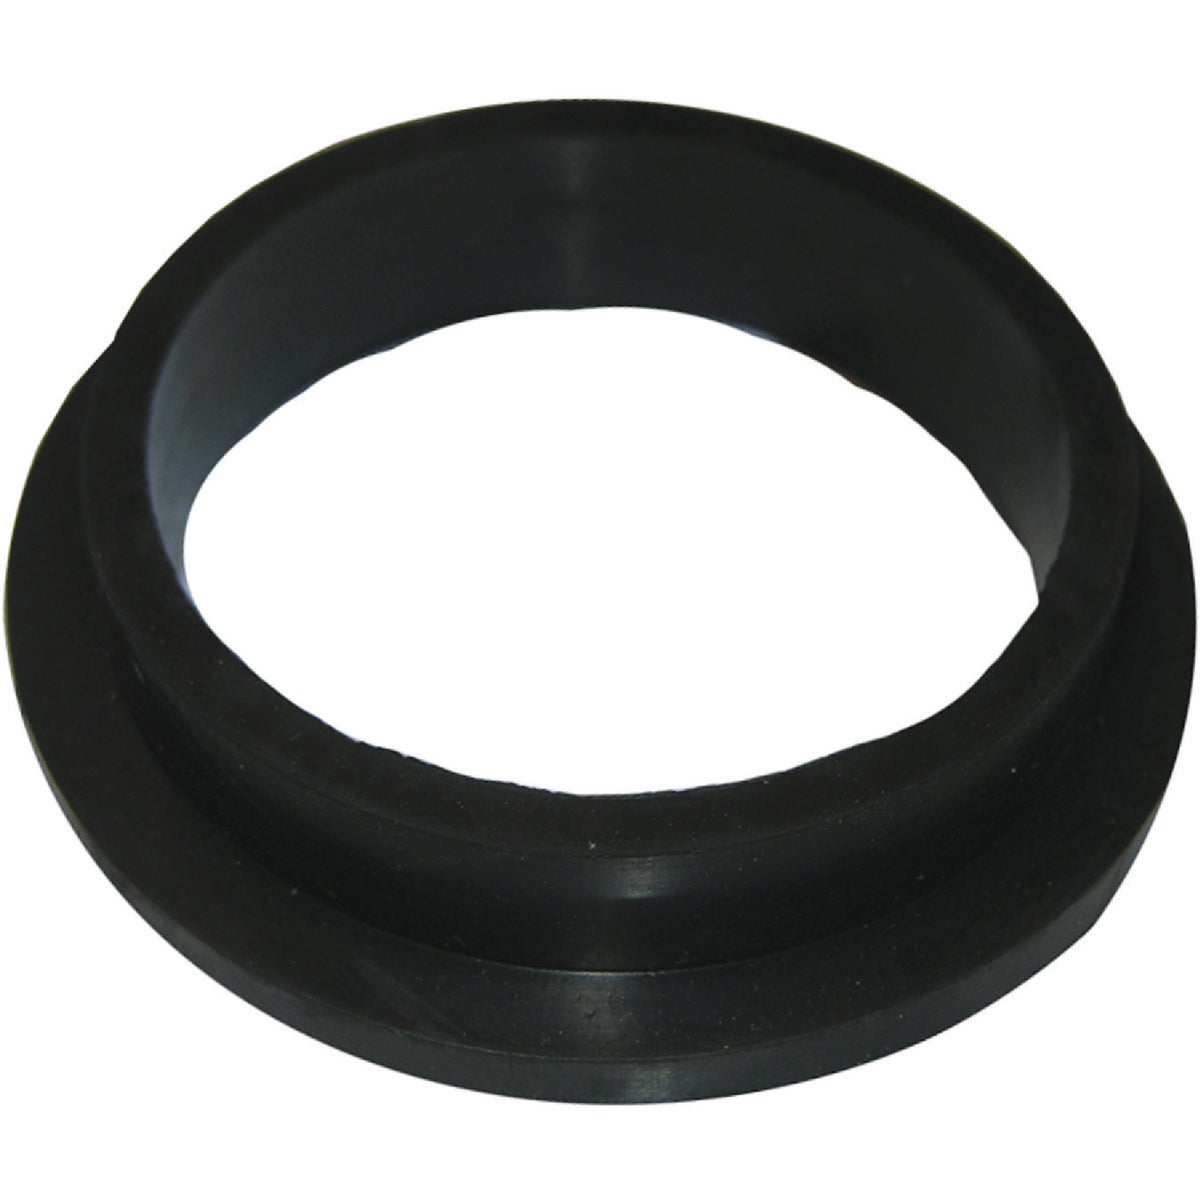 Lasco 02-3057 Lasco 2 In. Black Rubber Toilet Spud Flanged Washer  02-3057